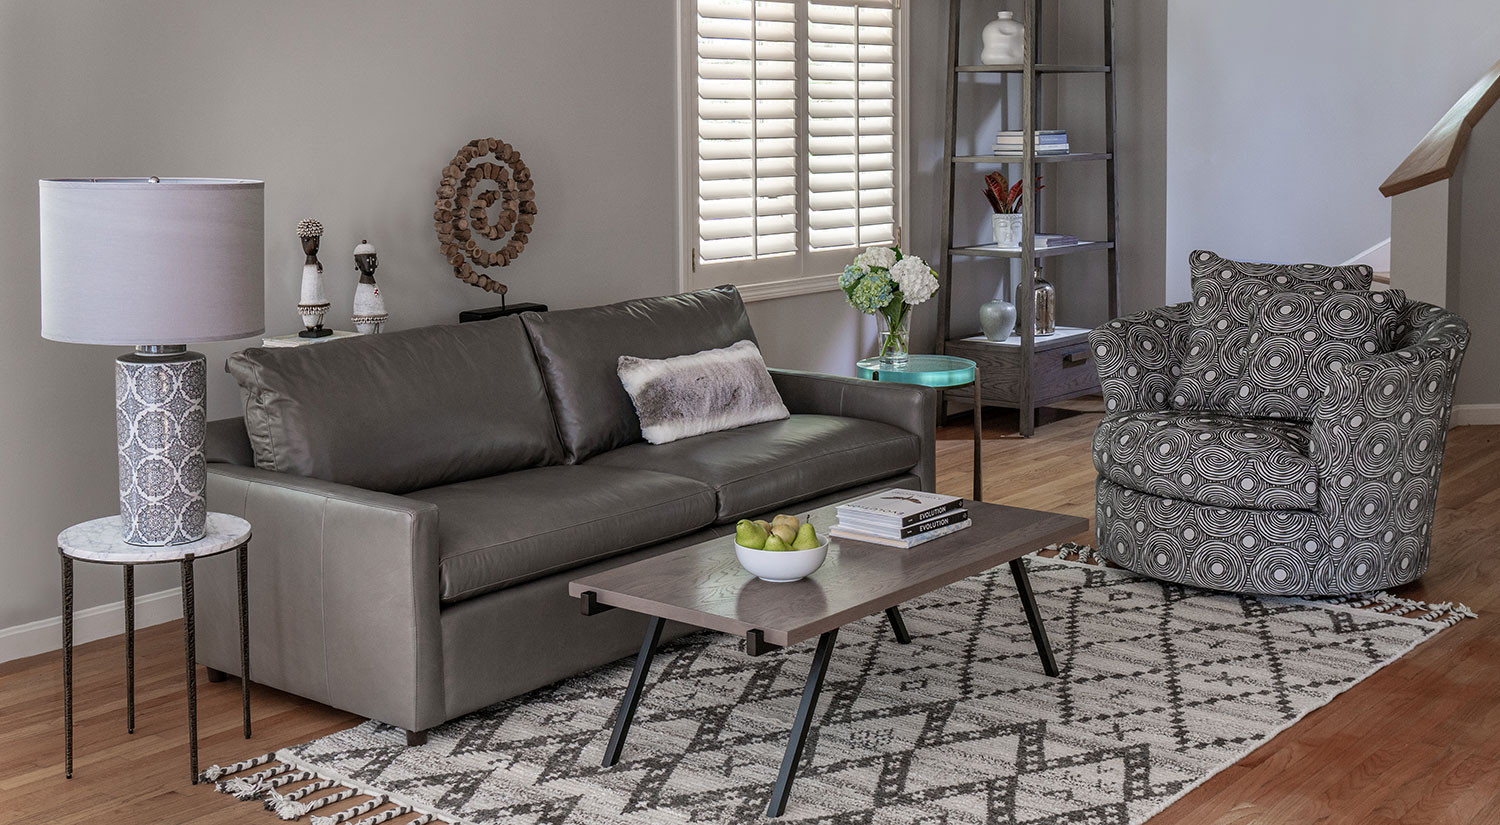 living room with a gray leather couch